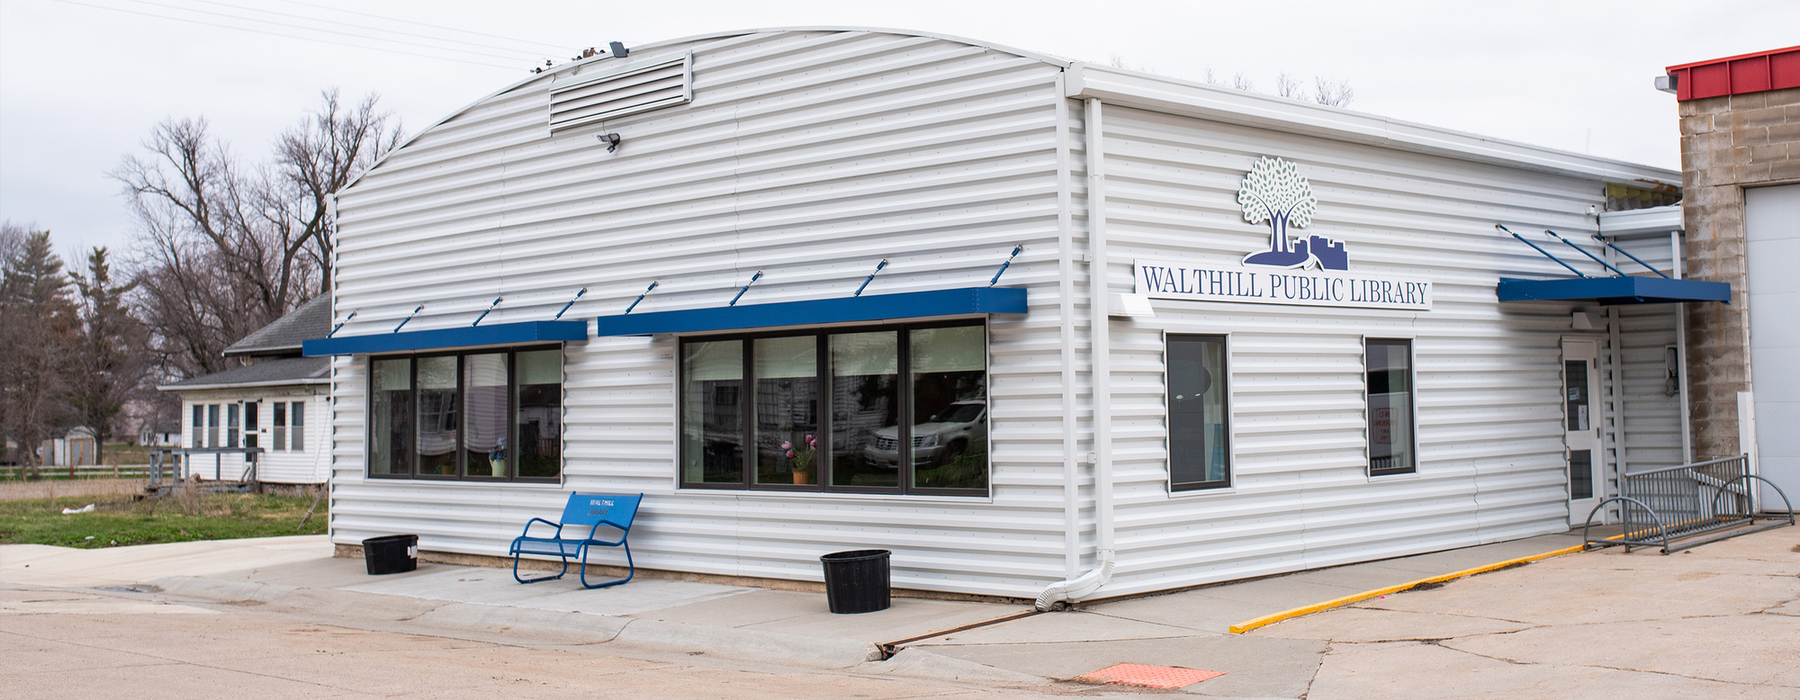 Walthill Public Library - White building with blue awnings